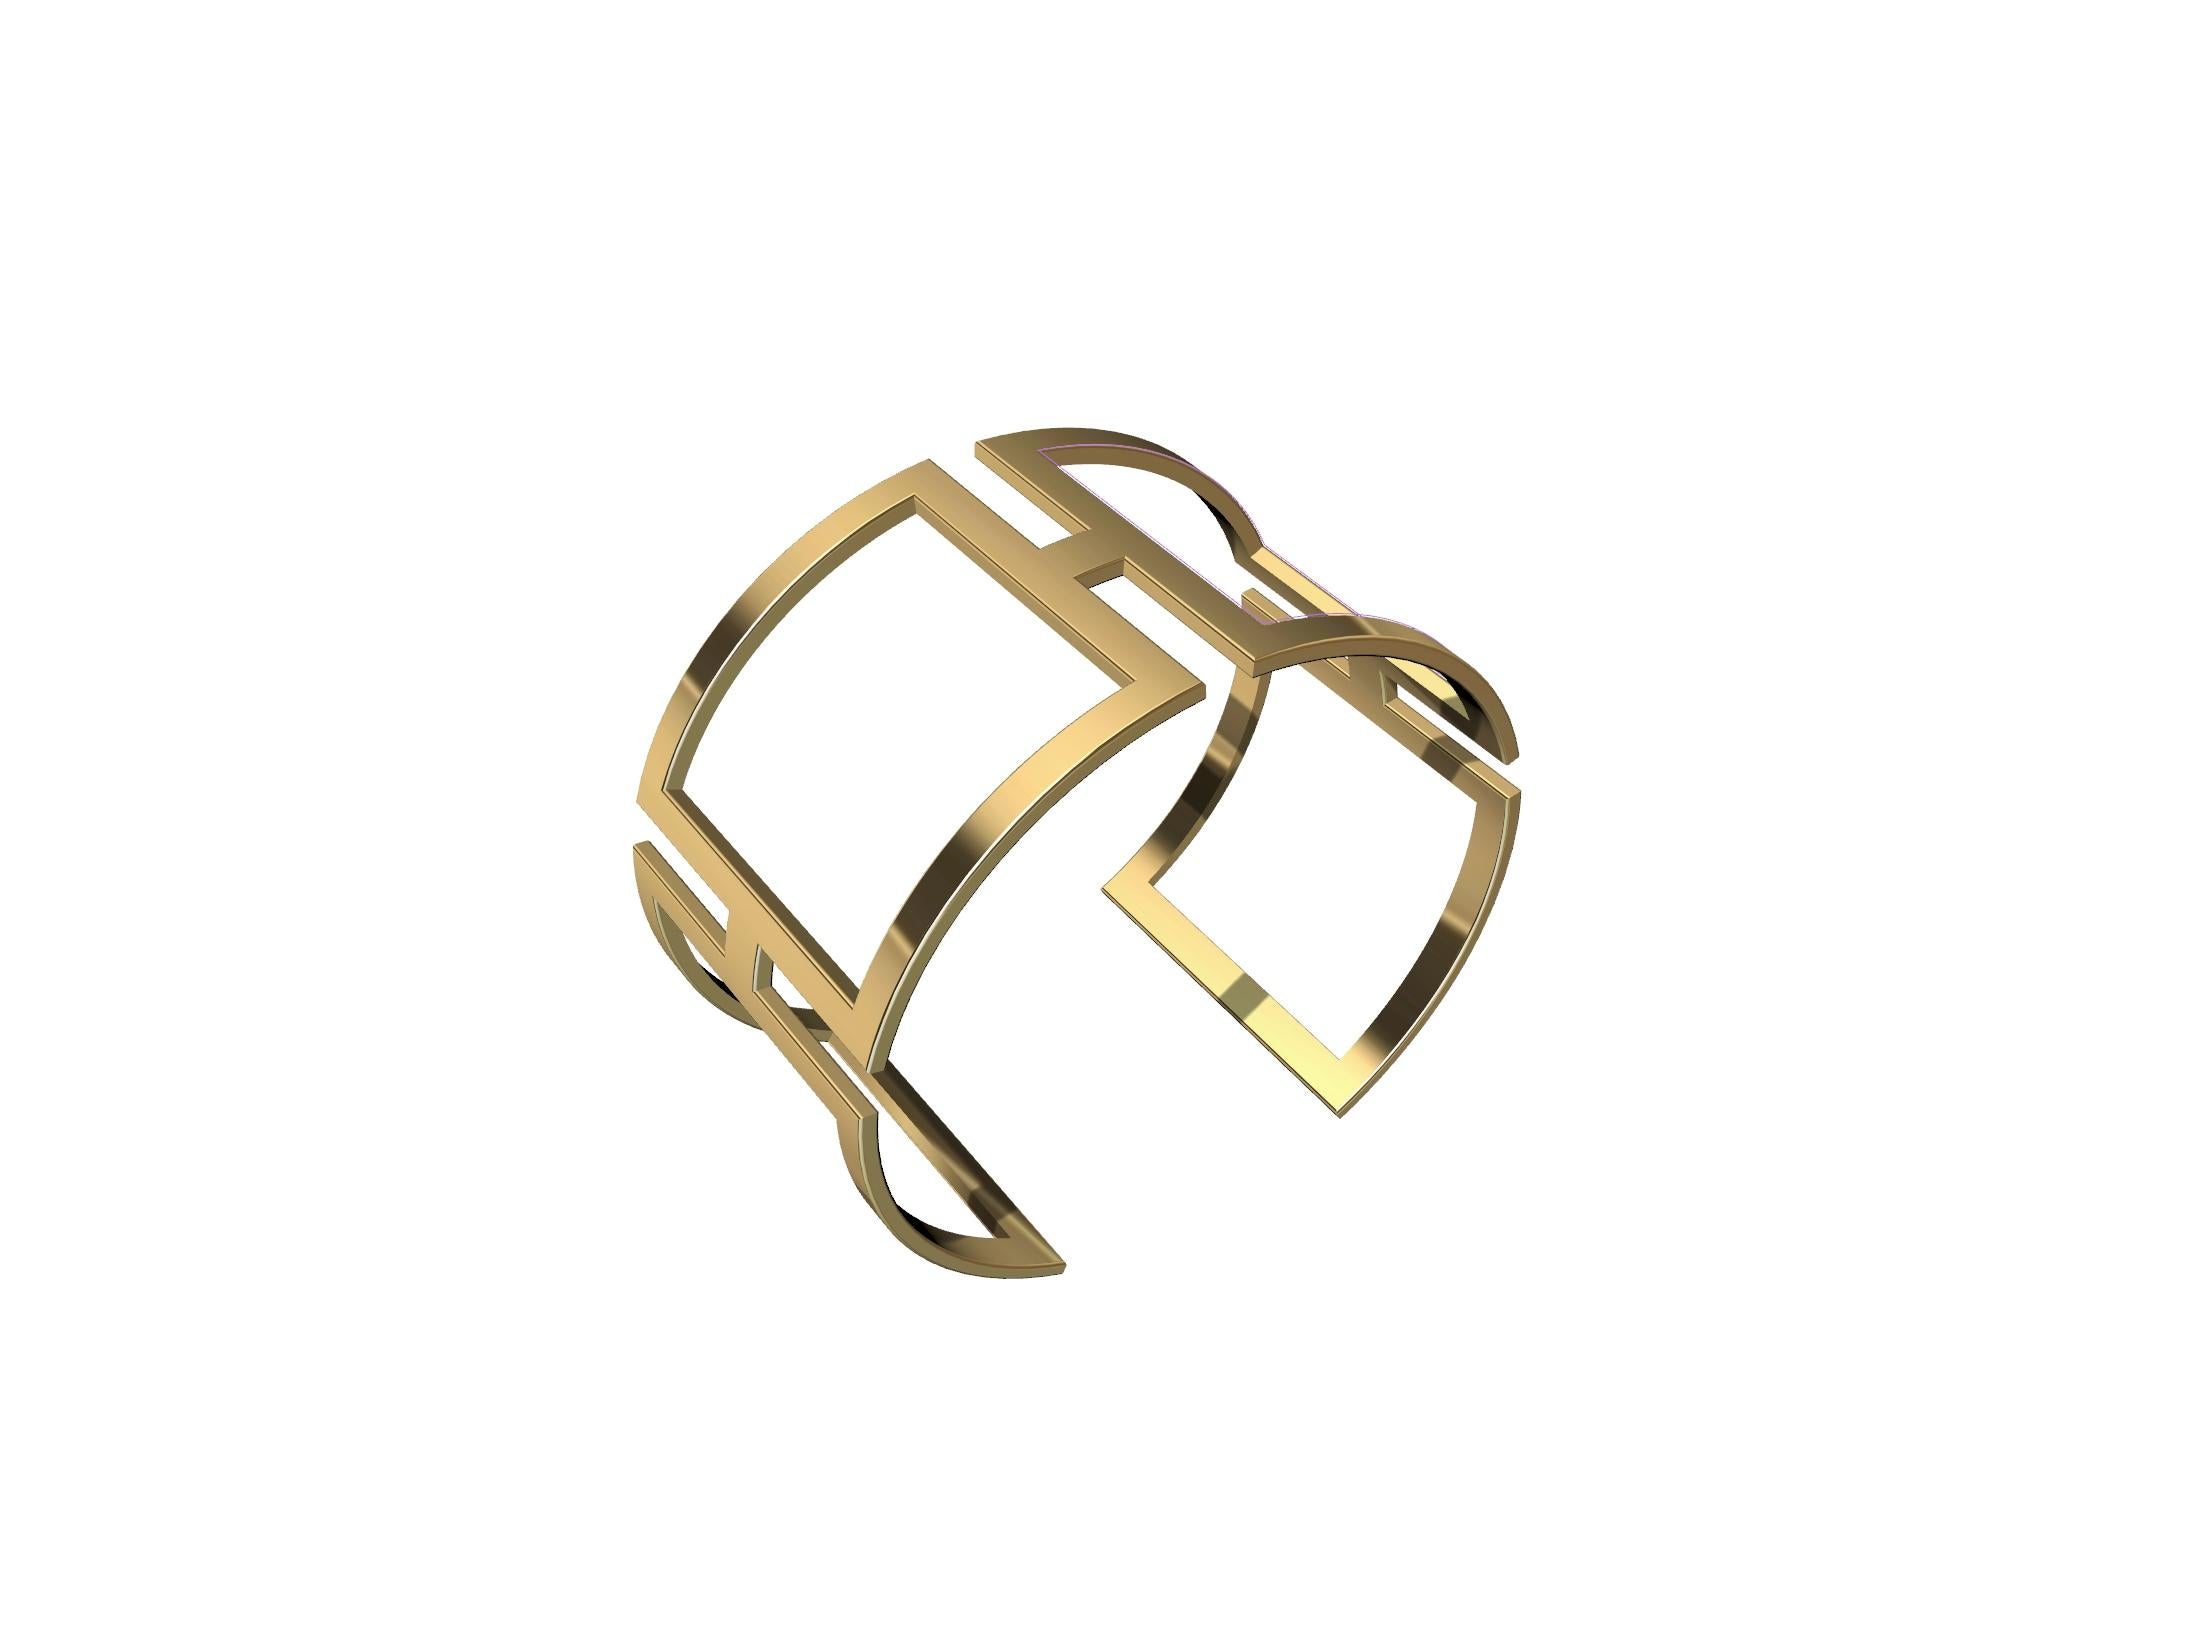 5 Karat Yellow Gold  Rectangle Cuff Bracelet , 3 x 1.45 mm thick x  mm 1 3/16ths inch  wide. This is one of my early designs that I manufactured and sold in Tiffany's in sterling. Now my caster offers 5 karat gold. I was using the simple rectangle